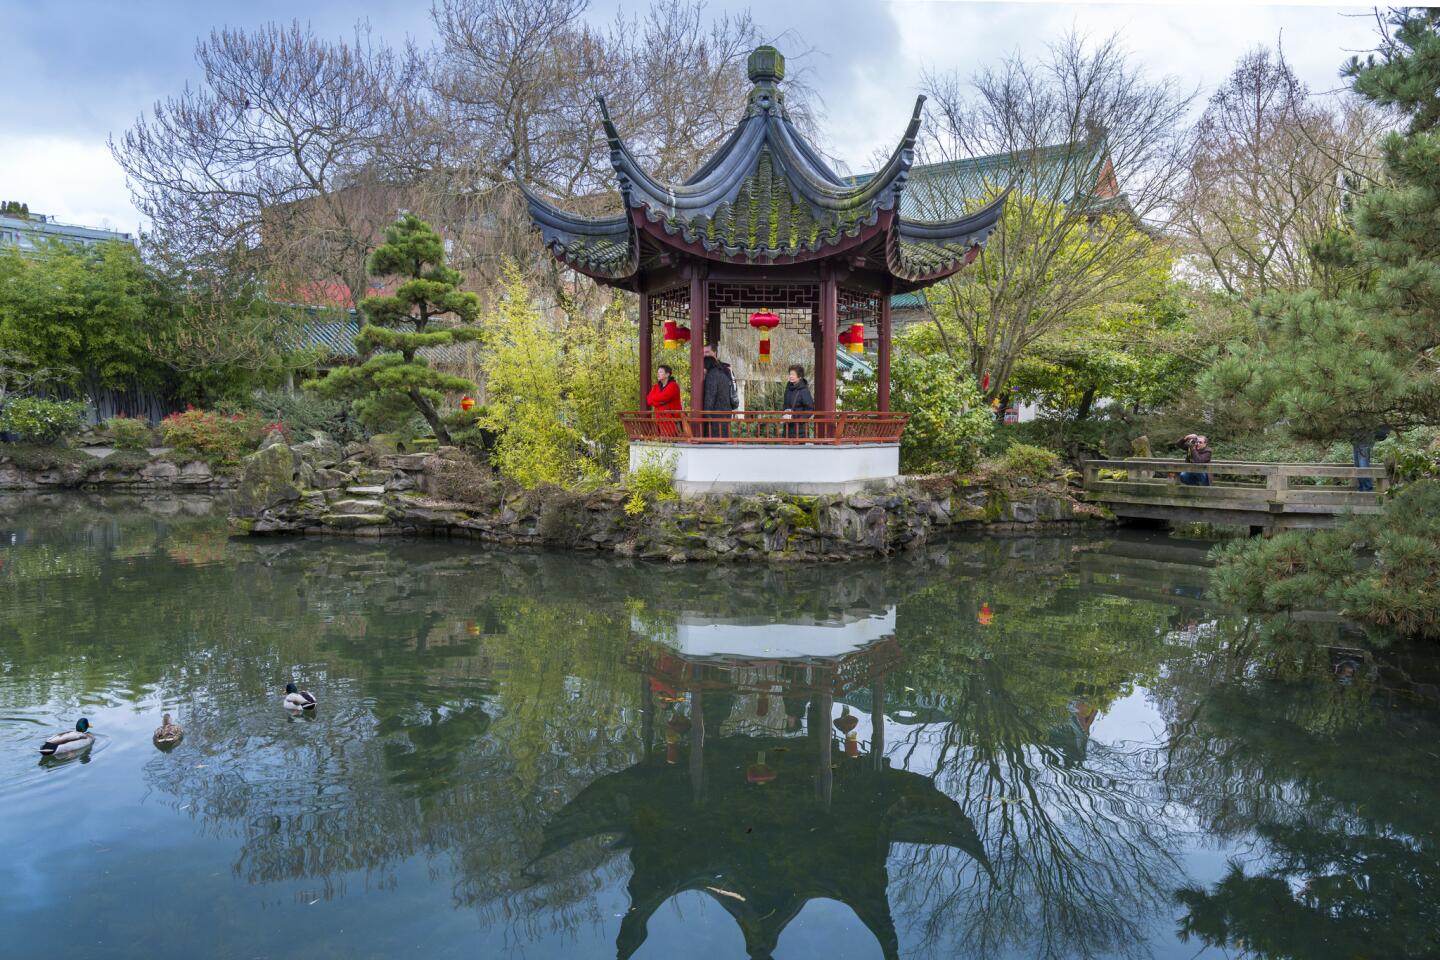 Vancouver has one of the biggest Chinatowns in North America. Here, a pagoda casts its reflection at the neighborhood's Dr. Sun Yat-Sen Classical Chinese Garden.